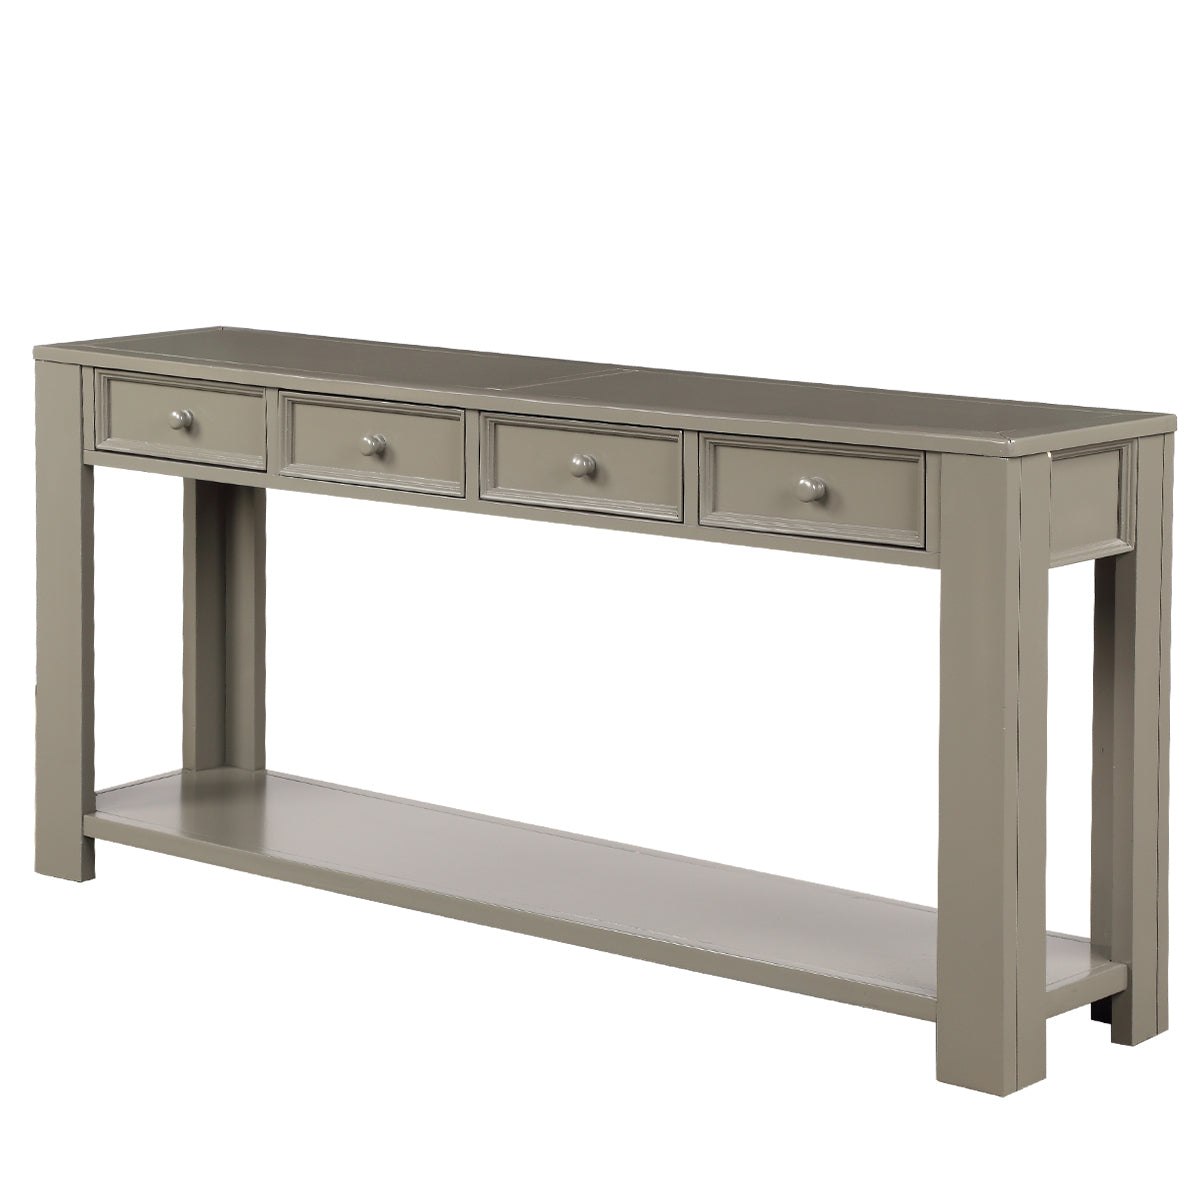 Entryway hall table with storage